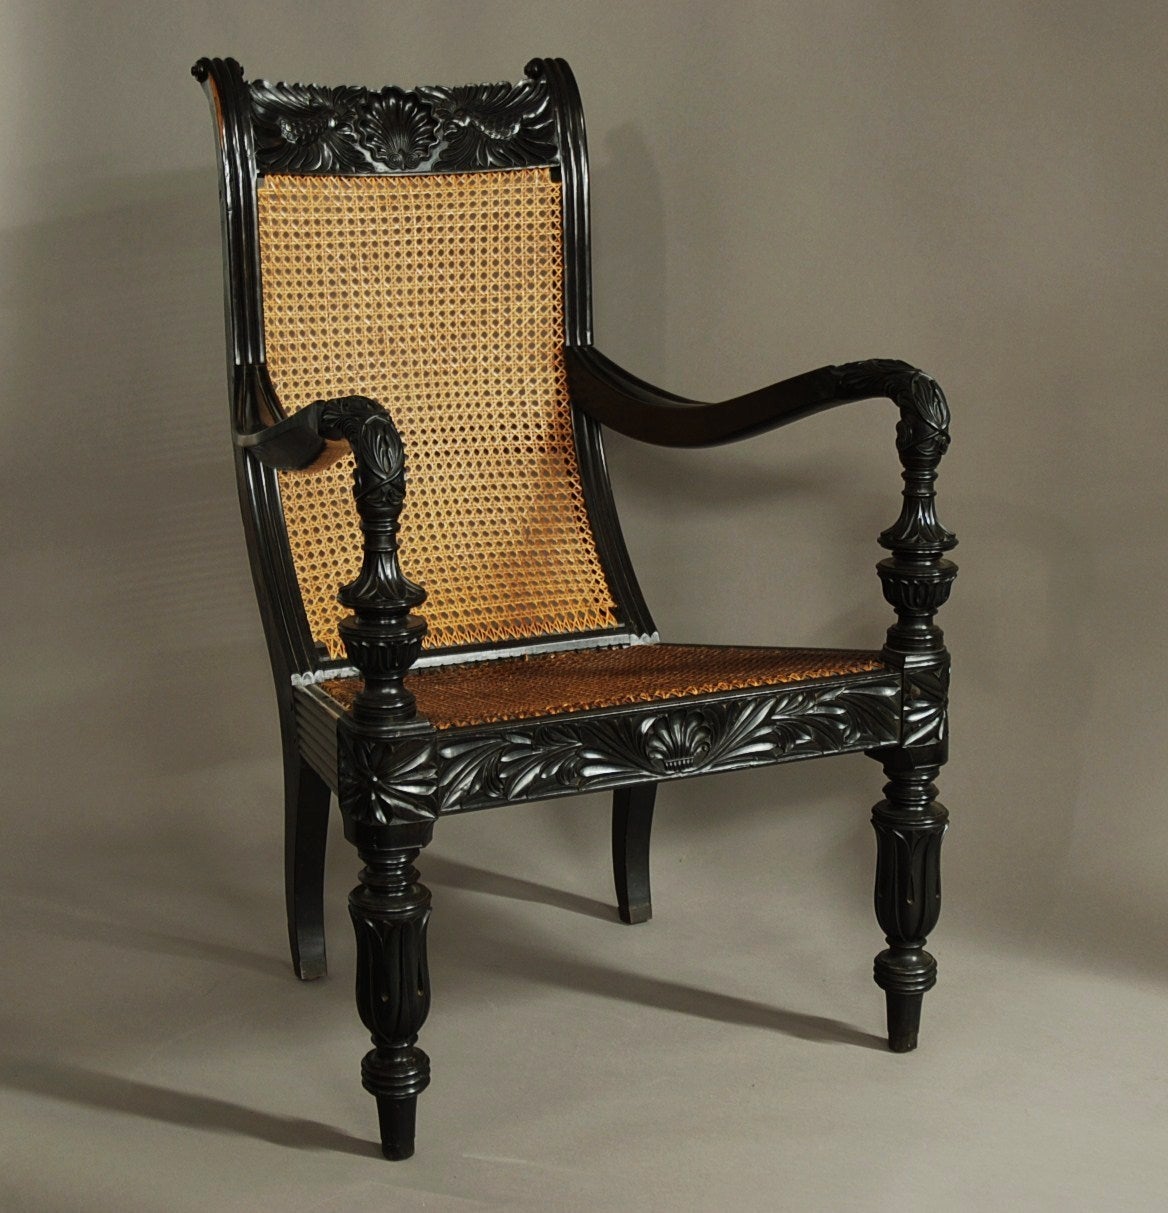 A mid 19th century superb carved solid ebony easy chair from the Galle district (Ceylon/Sri Lanka).

This superb chair consists of a finely carved top rail with central scallop shell carving and finely carved birds to either side.

The uprights